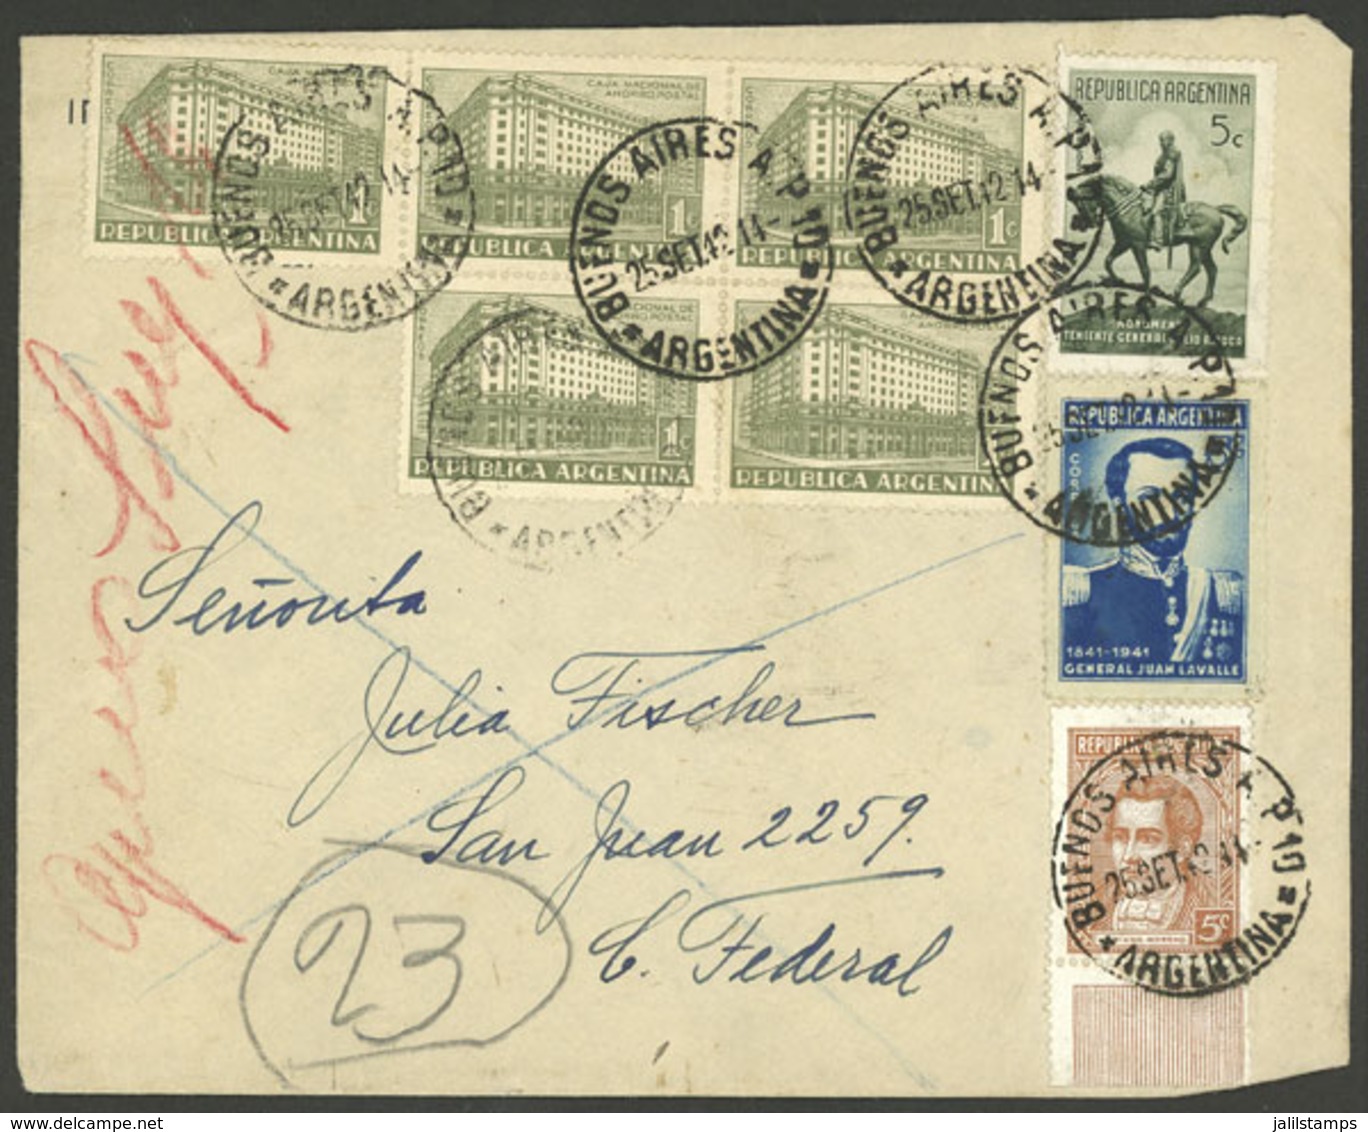 ARGENTINA: Cover Used In Buenos Aires On 25/SE/1942, Franked 20c. With Several Stamps, VF Quality - Briefe U. Dokumente